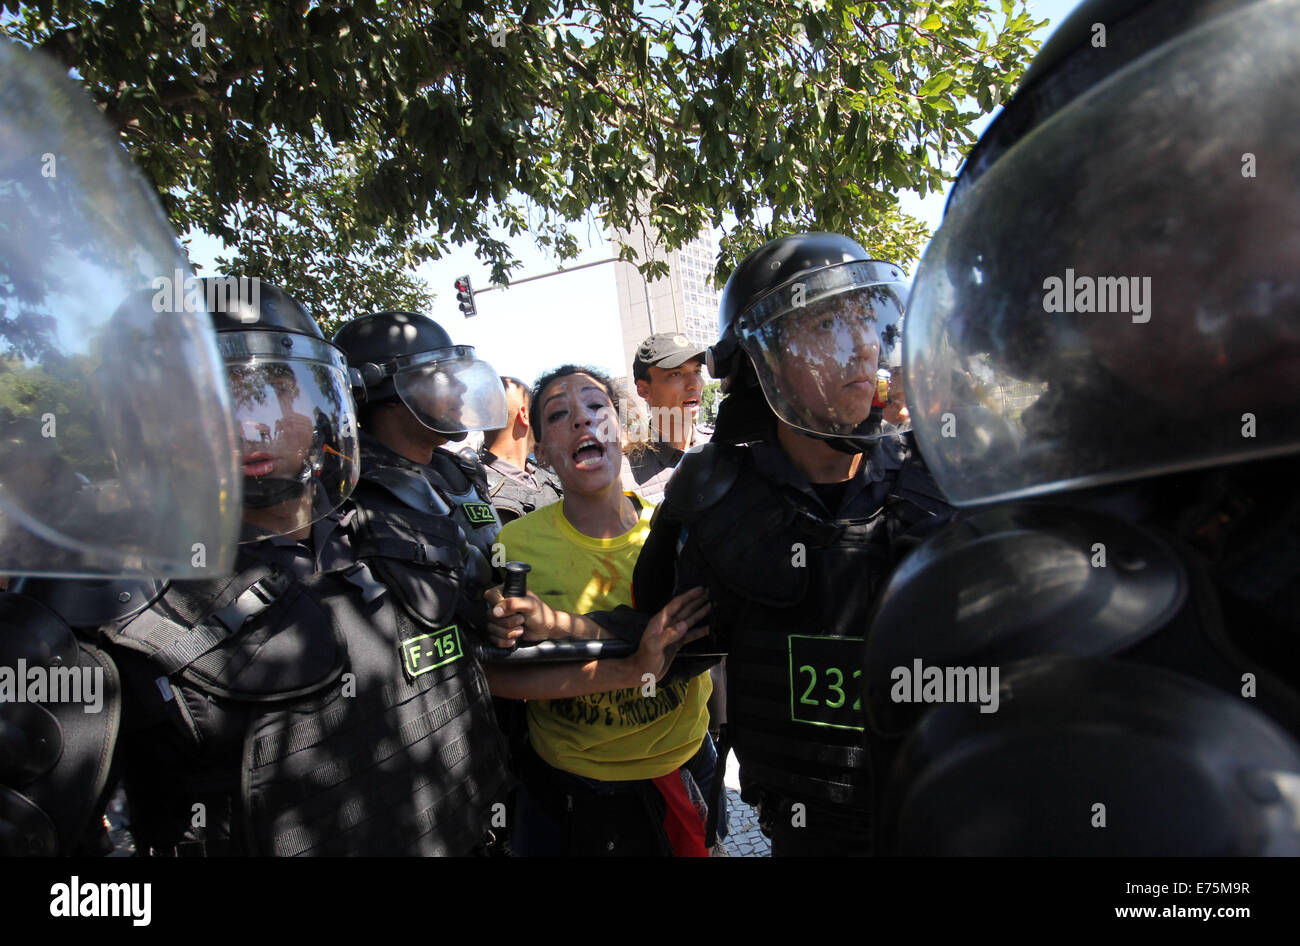 Rio De Janeiro, Brazil. 7th Sep, 2014. Policemen arrest a person participating in the 'Cry of the Excluded', carried out in parallel with a parade to commemorate Brazil's Independence Day, at the Presidente Vargas Avenue, in Rio de Janeiro, Brazil, on Sept. 7, 2014. Brazil celebrated the 192nd anniversary of its independence on Sunday. The 'Cry of the Excluded', is a movement formed by social organizations and unions. Credit:  Marcos Arcoverde/Estadao Conteudo/AGENCIA ESTADO/Xinhua/Alamy Live News Stock Photo